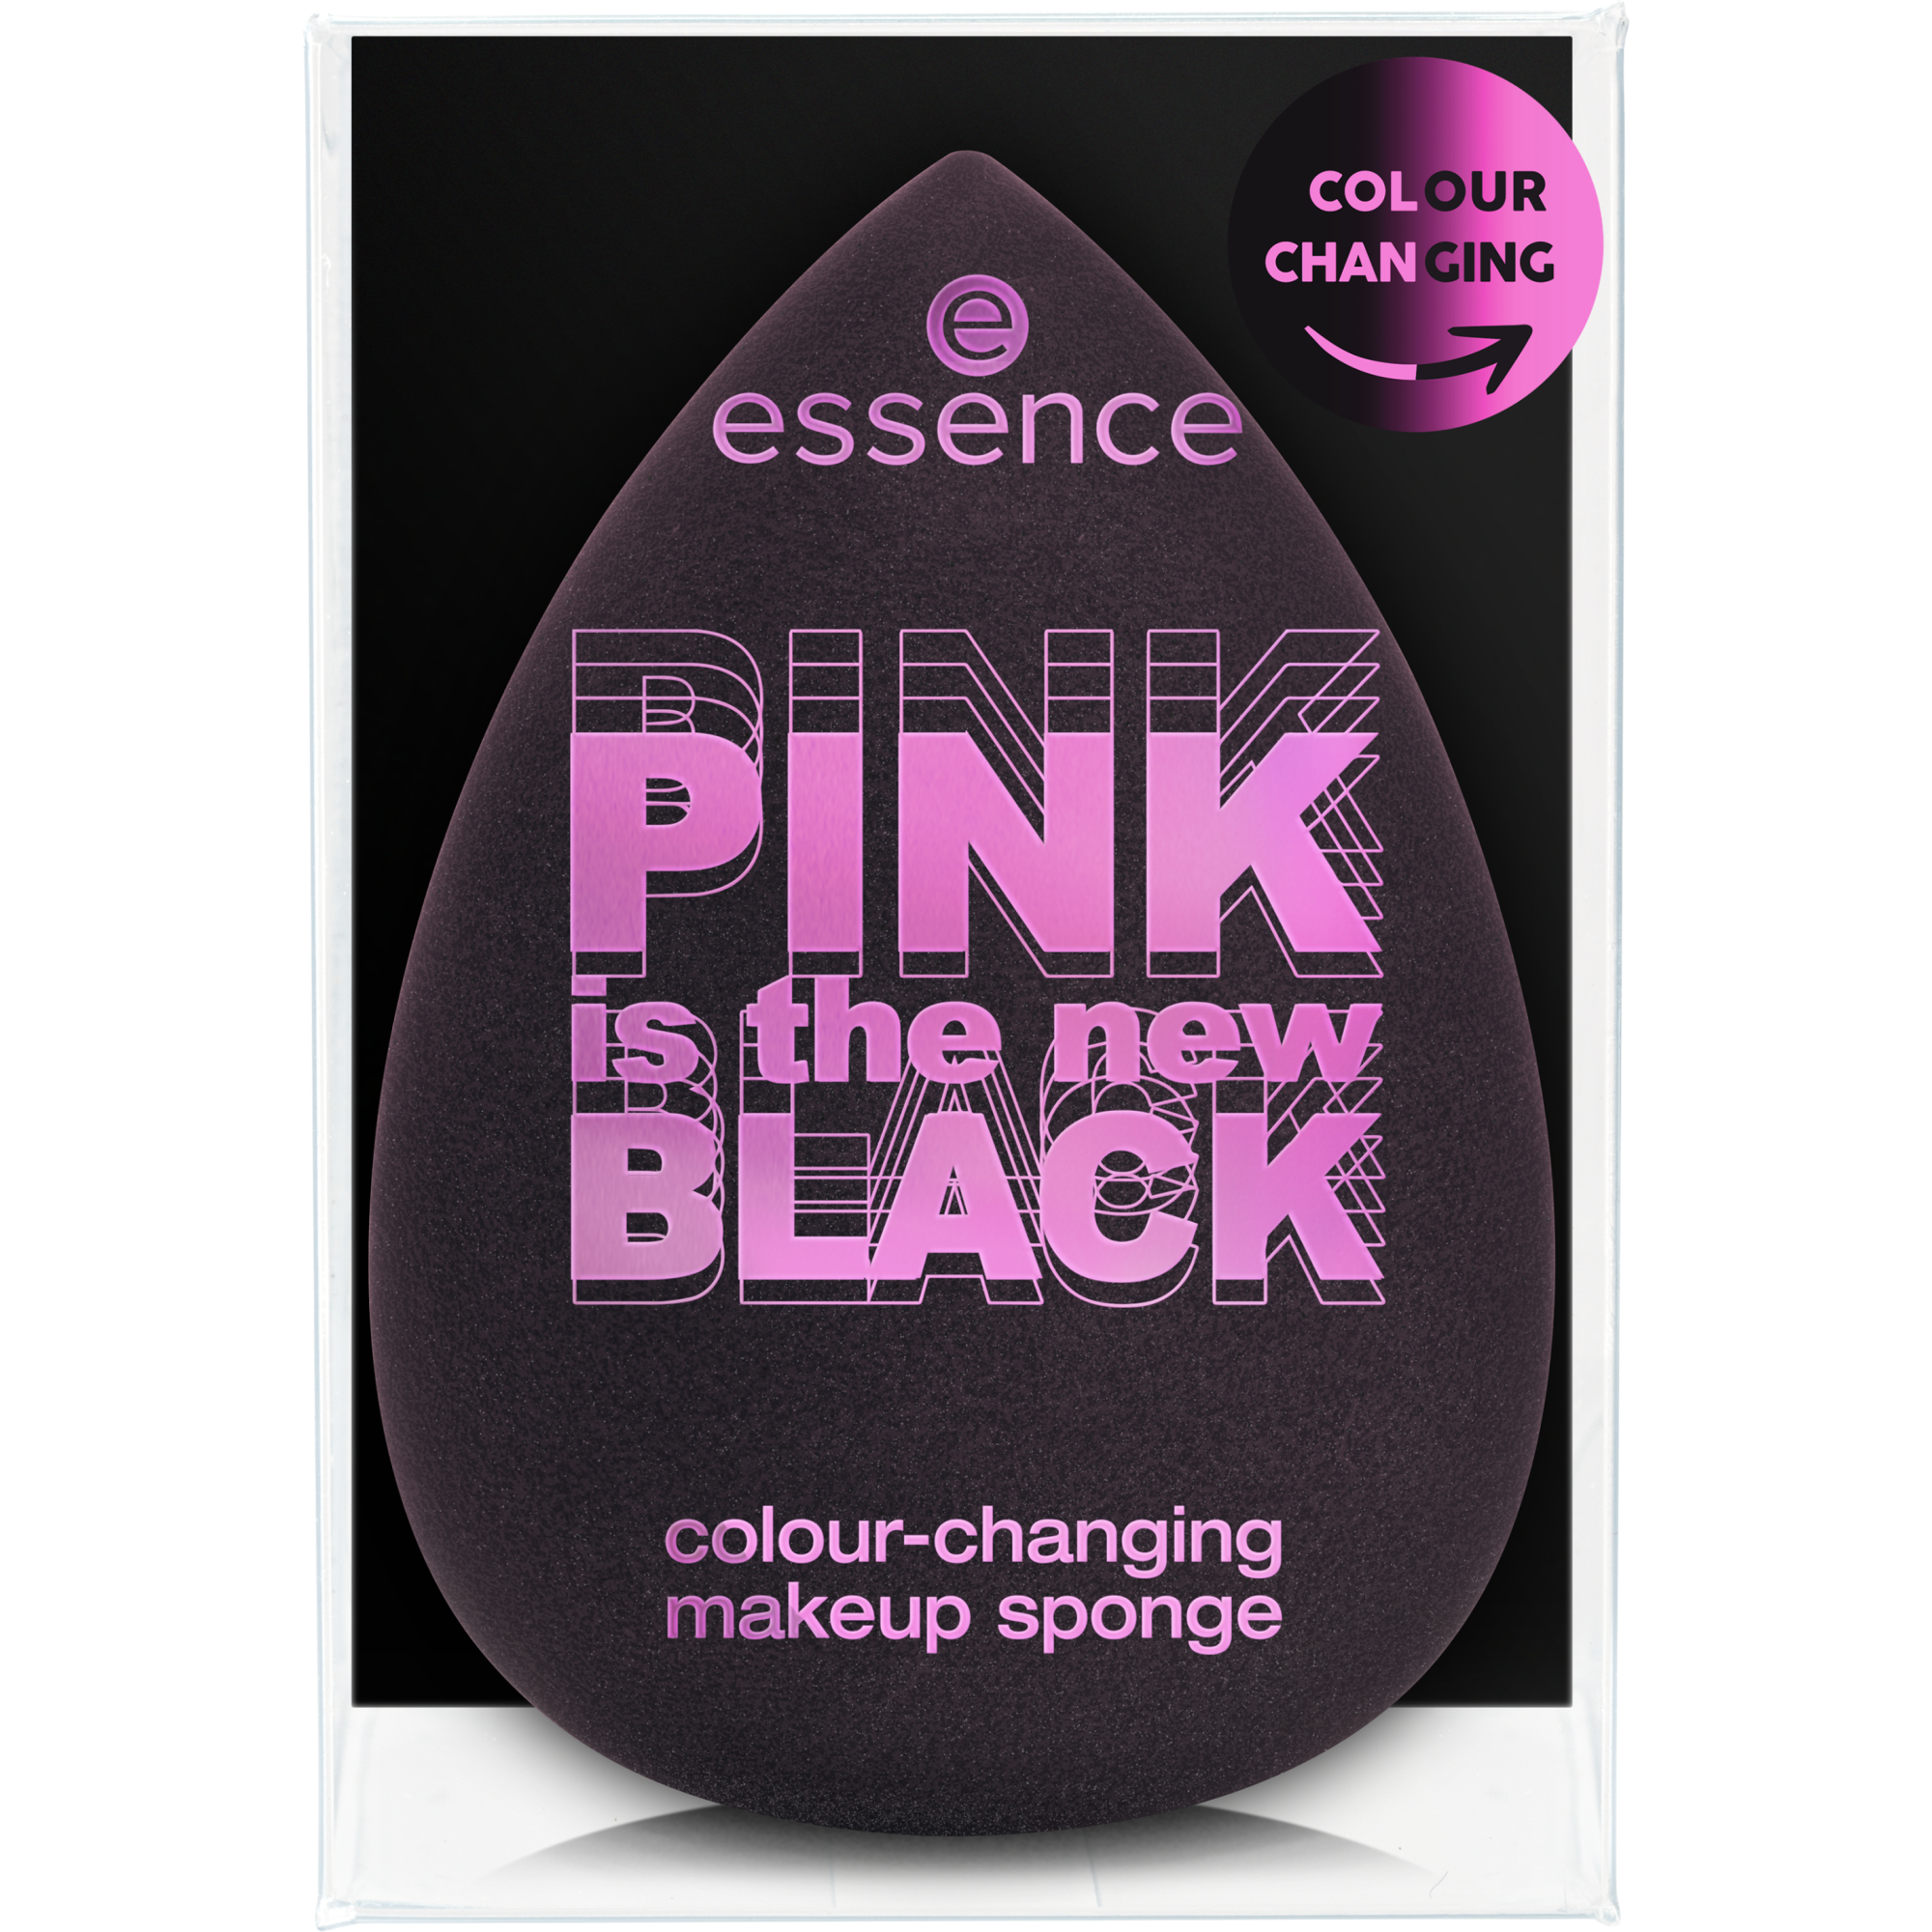 PINK is the new BLACK colour-changing makeup sponge